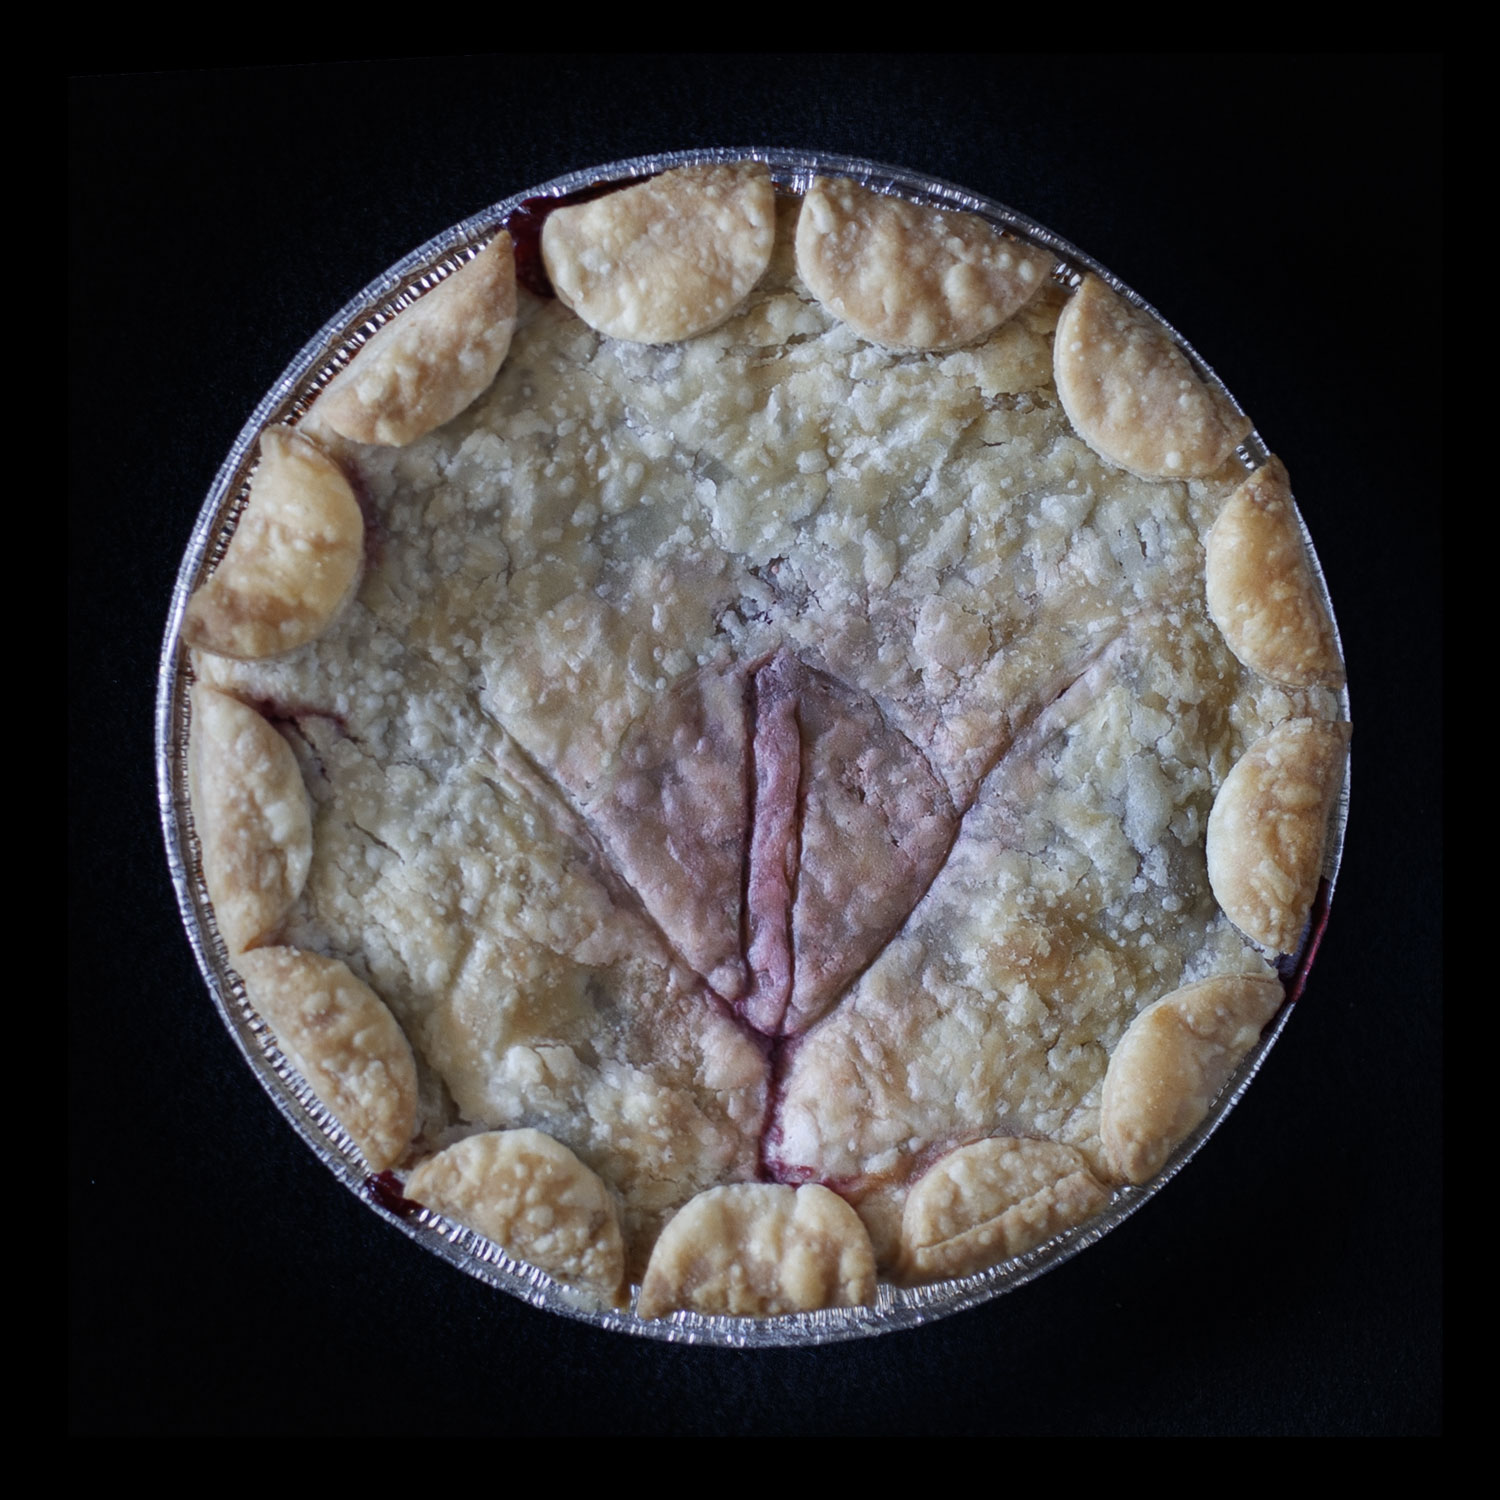 Baked pussy art pie on a black background. Pie has half circles around the border. 